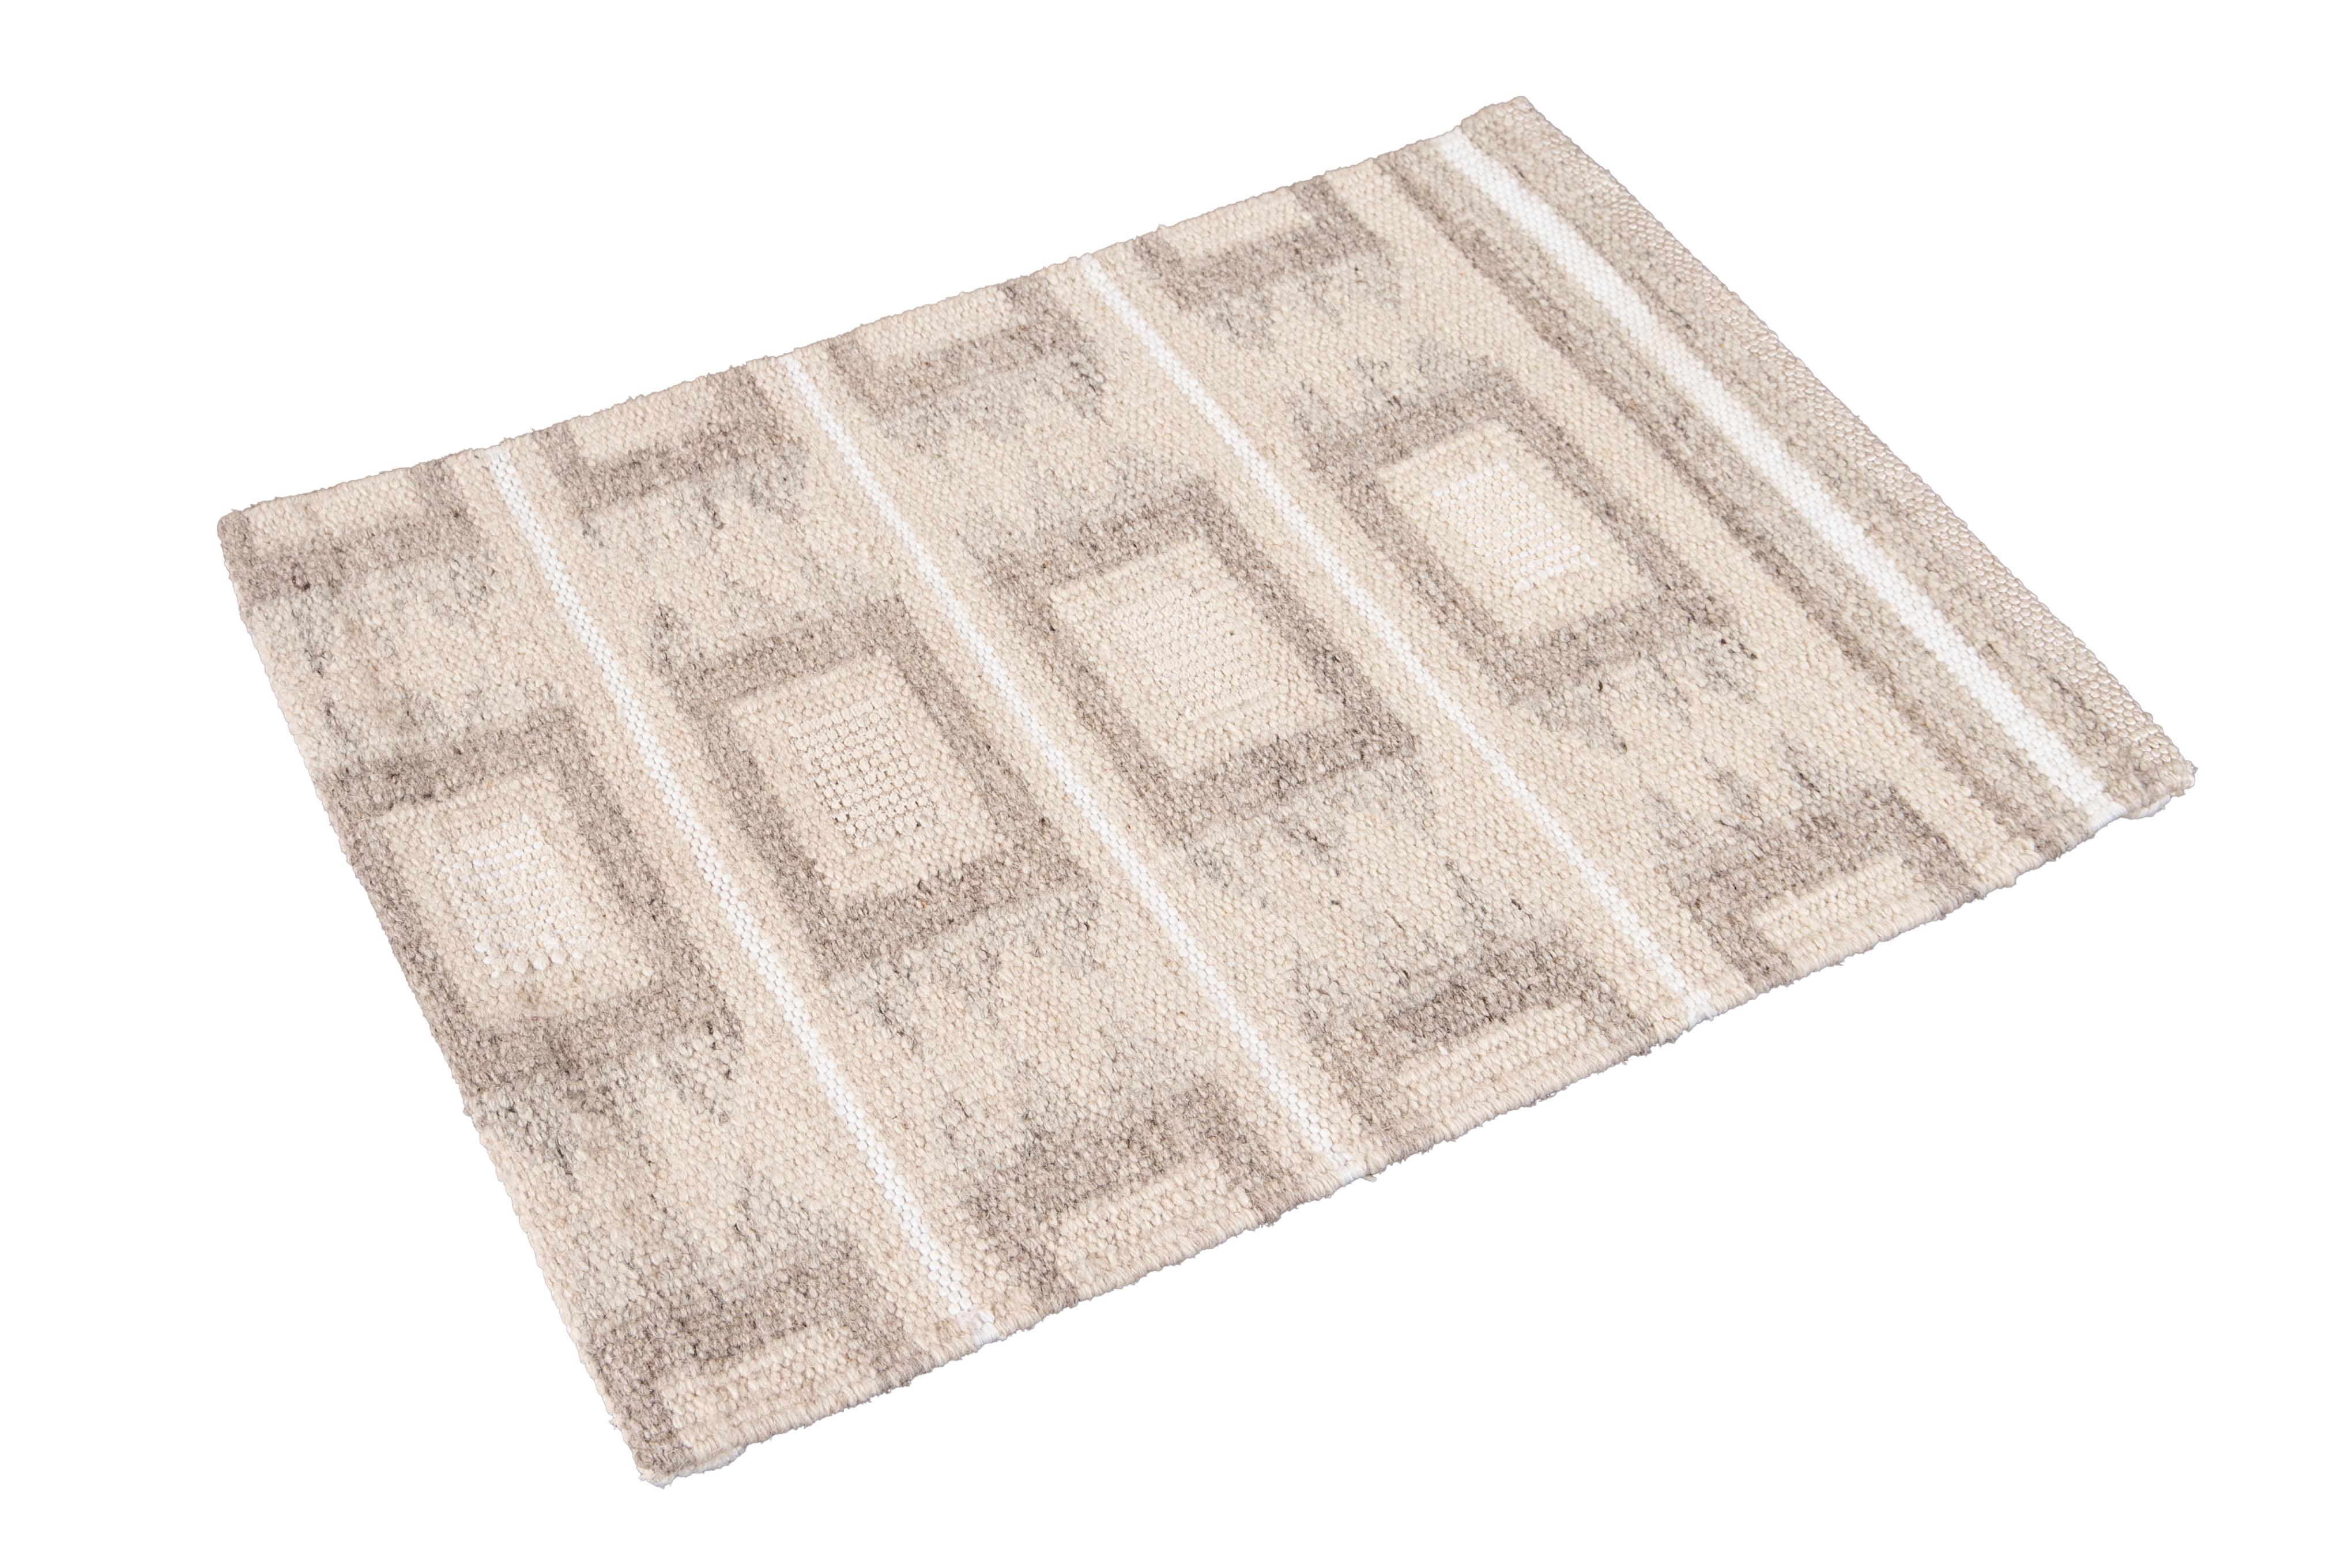 Wool Scandinavian style Kilim custom rug. Custom sizes and colors made-to-order.

Material: Wool 
Lead time: Approx. 15-20 weeks Available
Colors: Custom colors and styles available made in India.
The price listed is for an 8' x 10' rug.